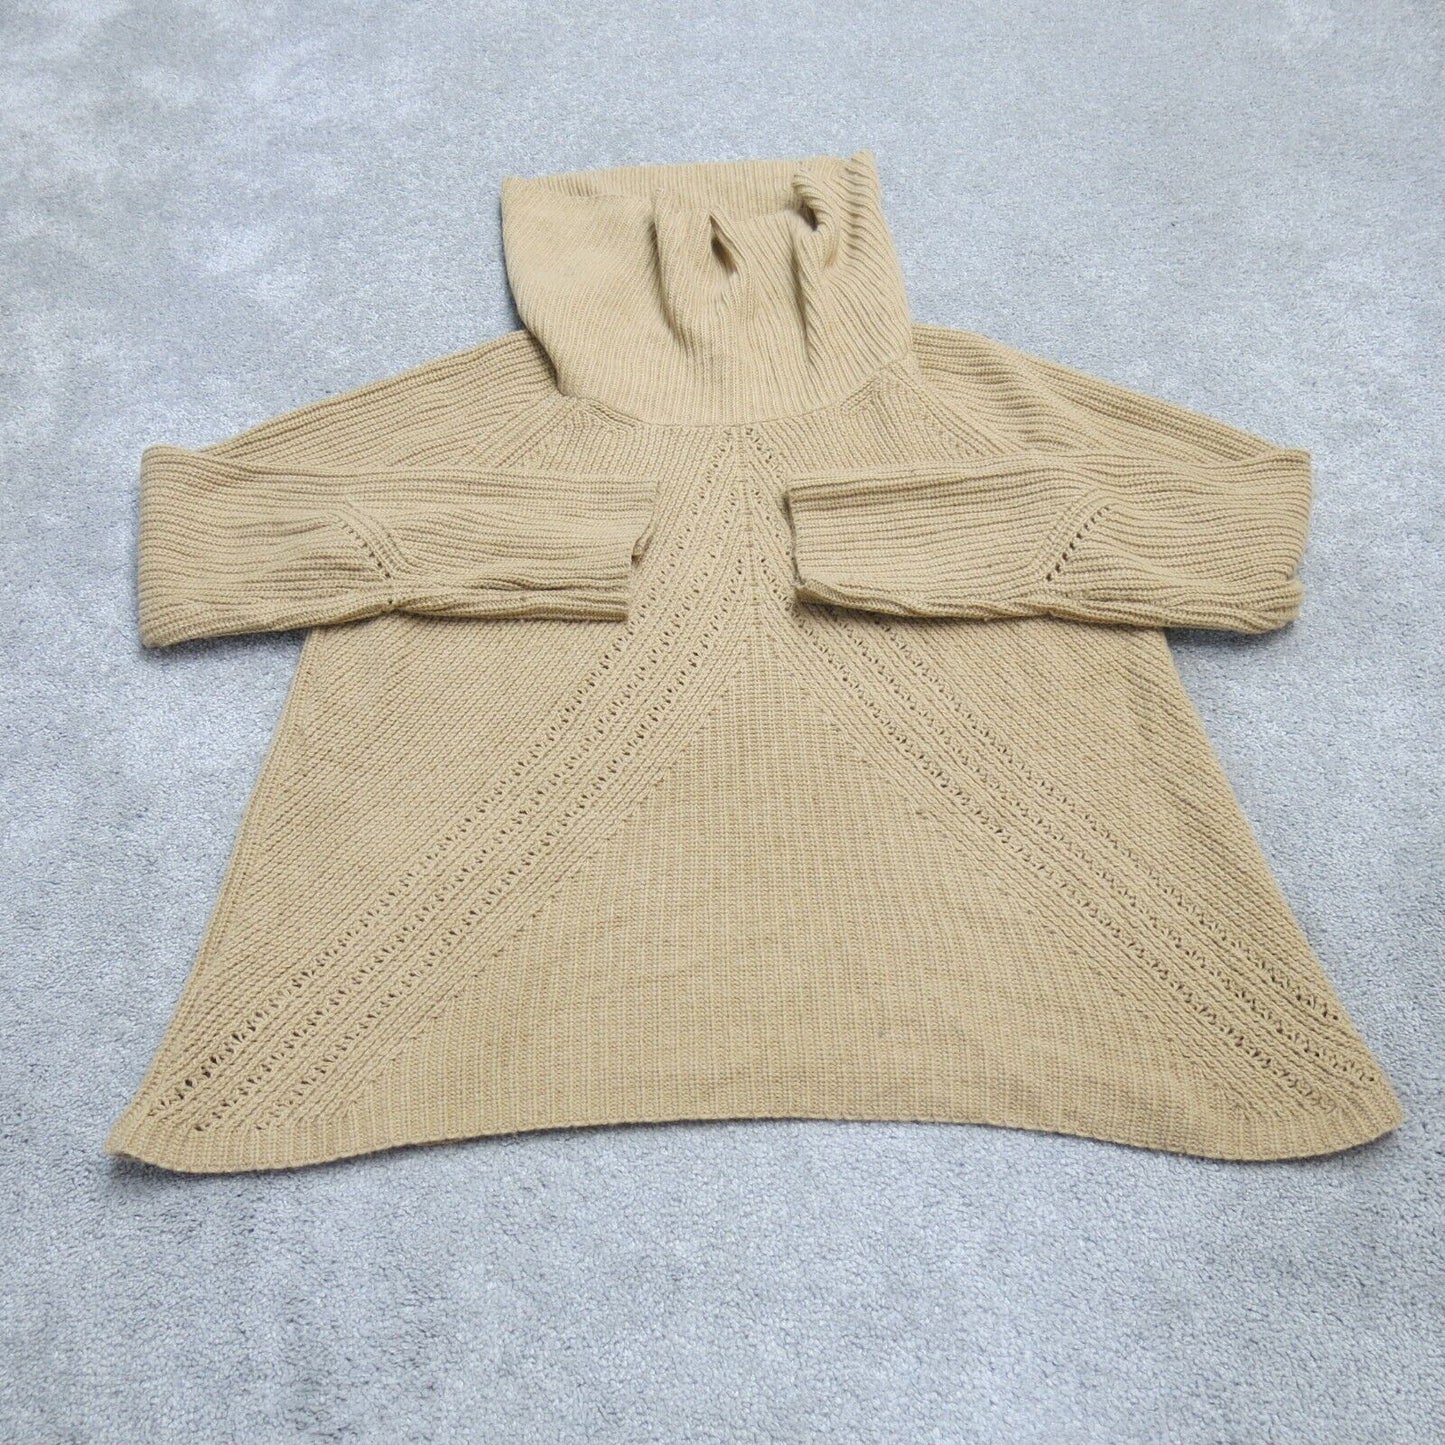 Ann Taylor Womens Pullover Sweater Long Sleeves Turtle Neck Tan/Beige Size XL